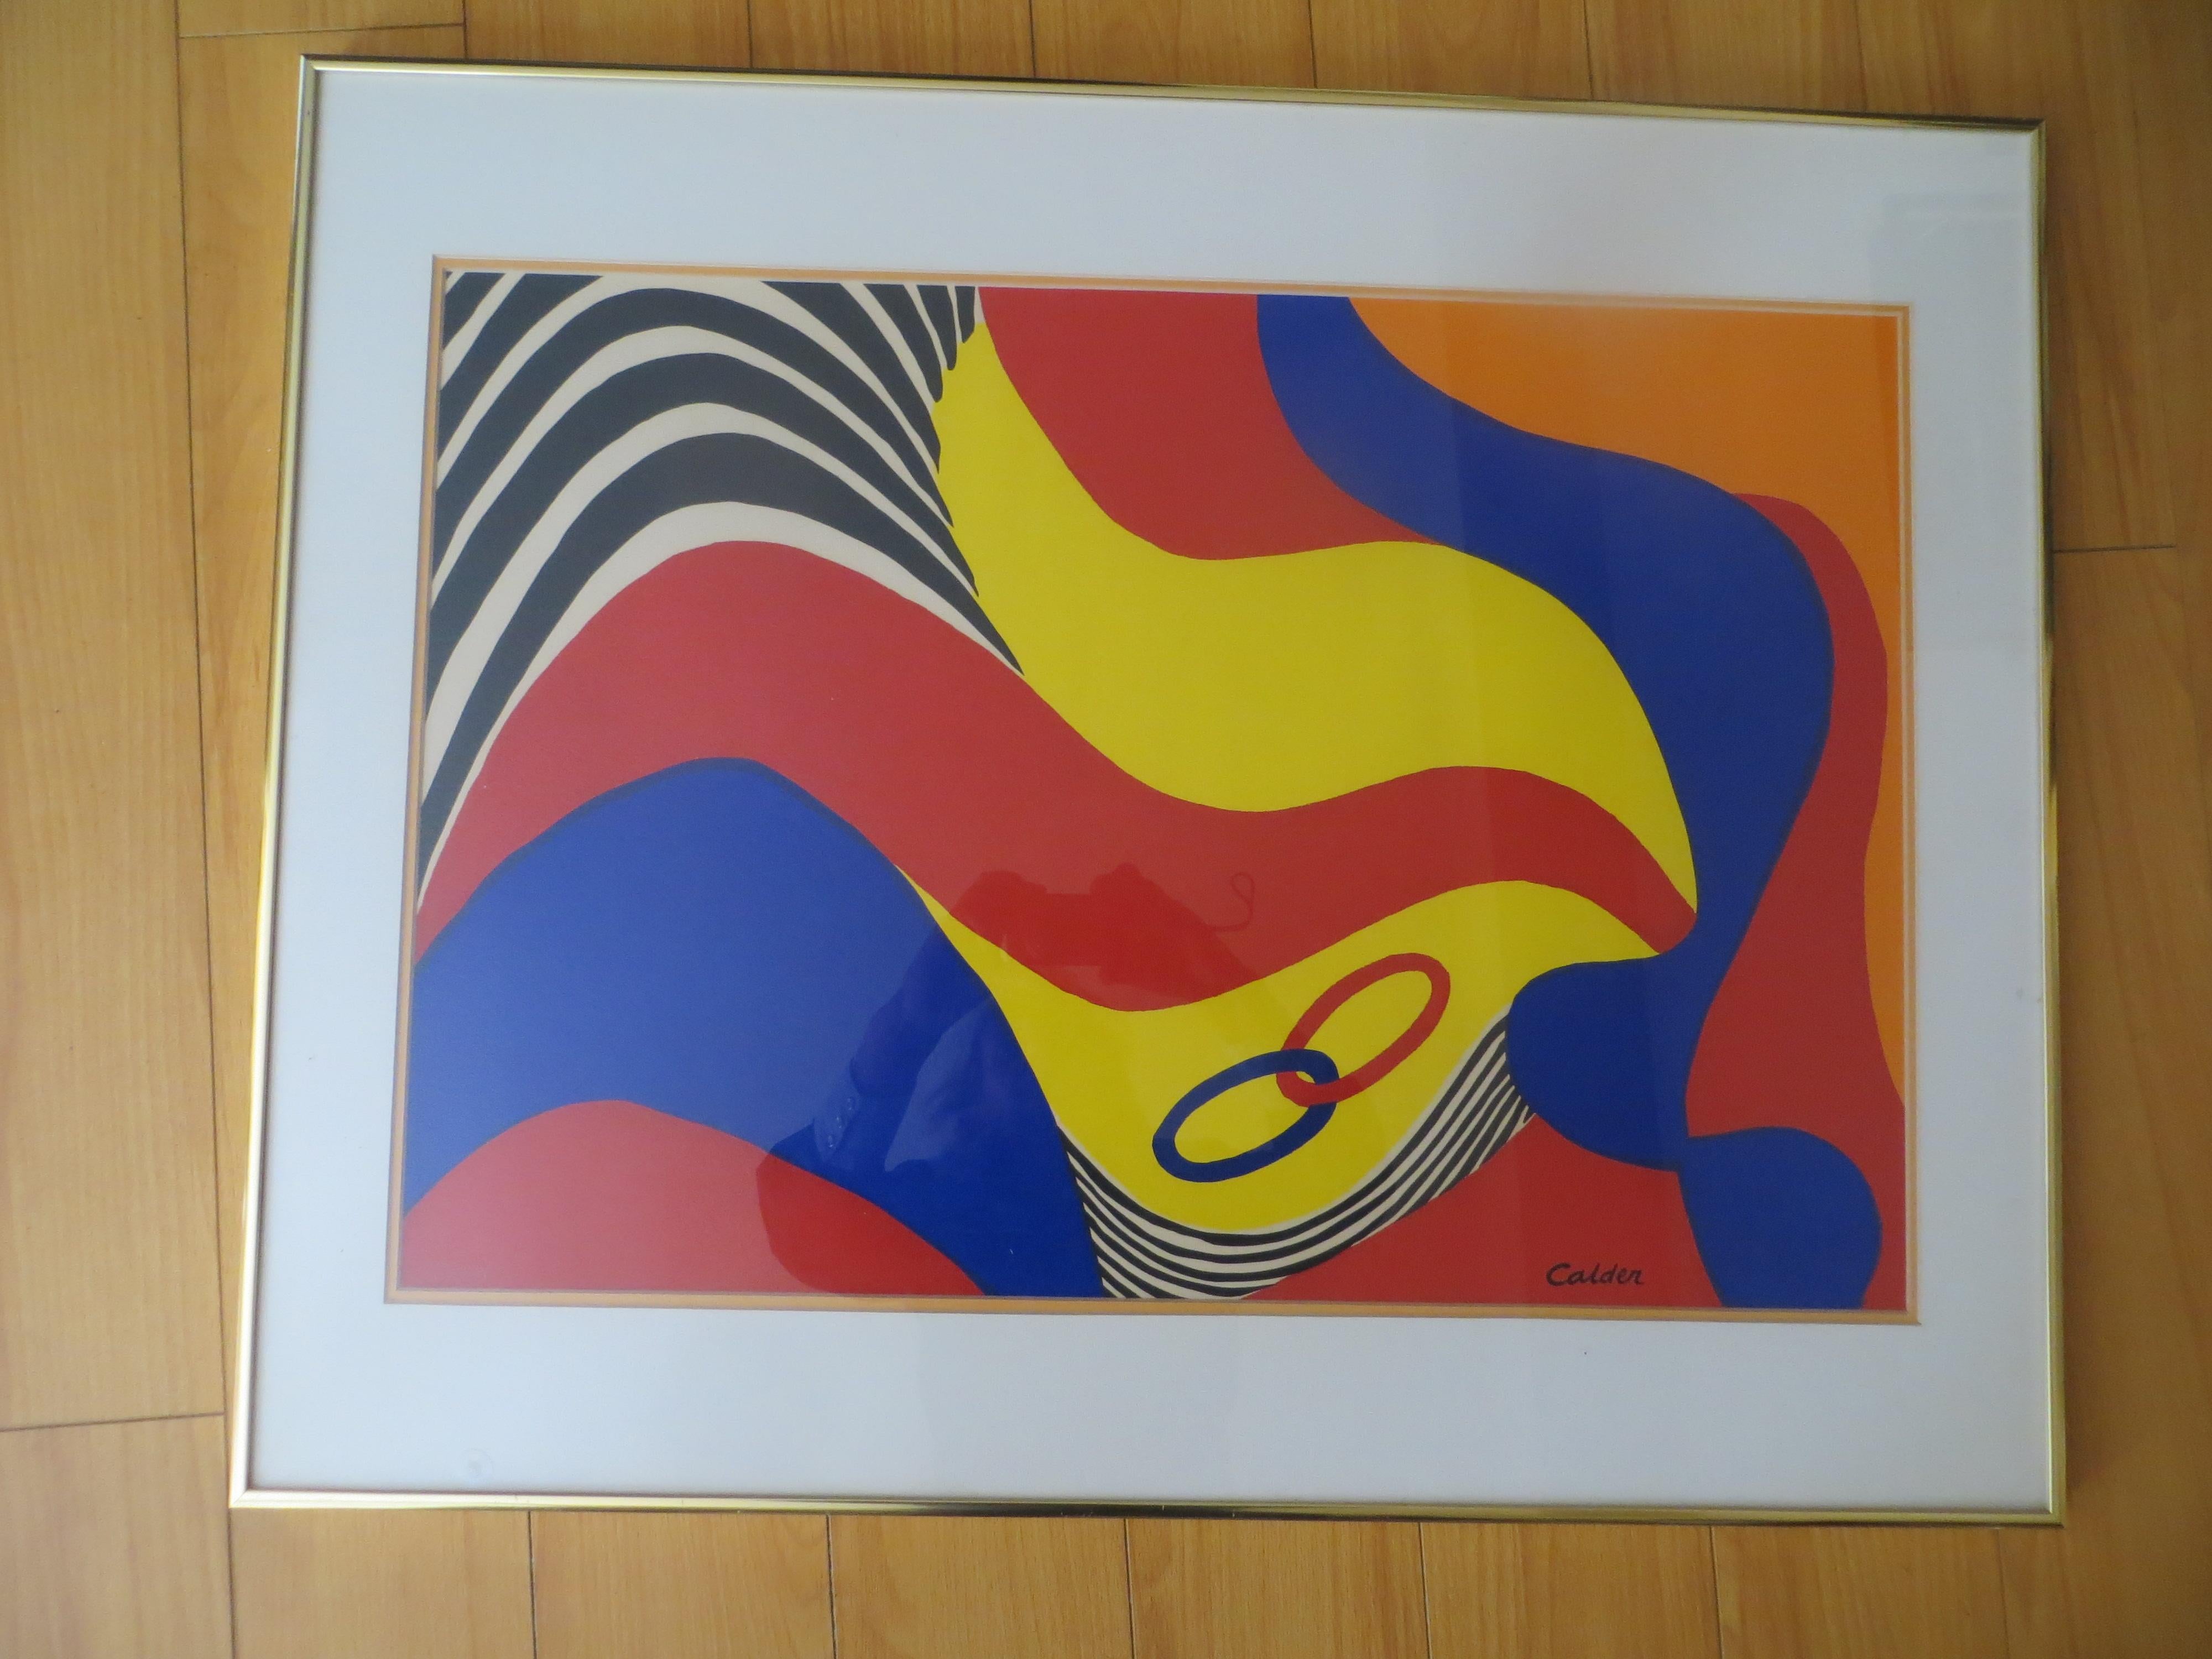  CalderAbstract lithograph Flying colors 1975 limitierte Auflage  im Angebot 3